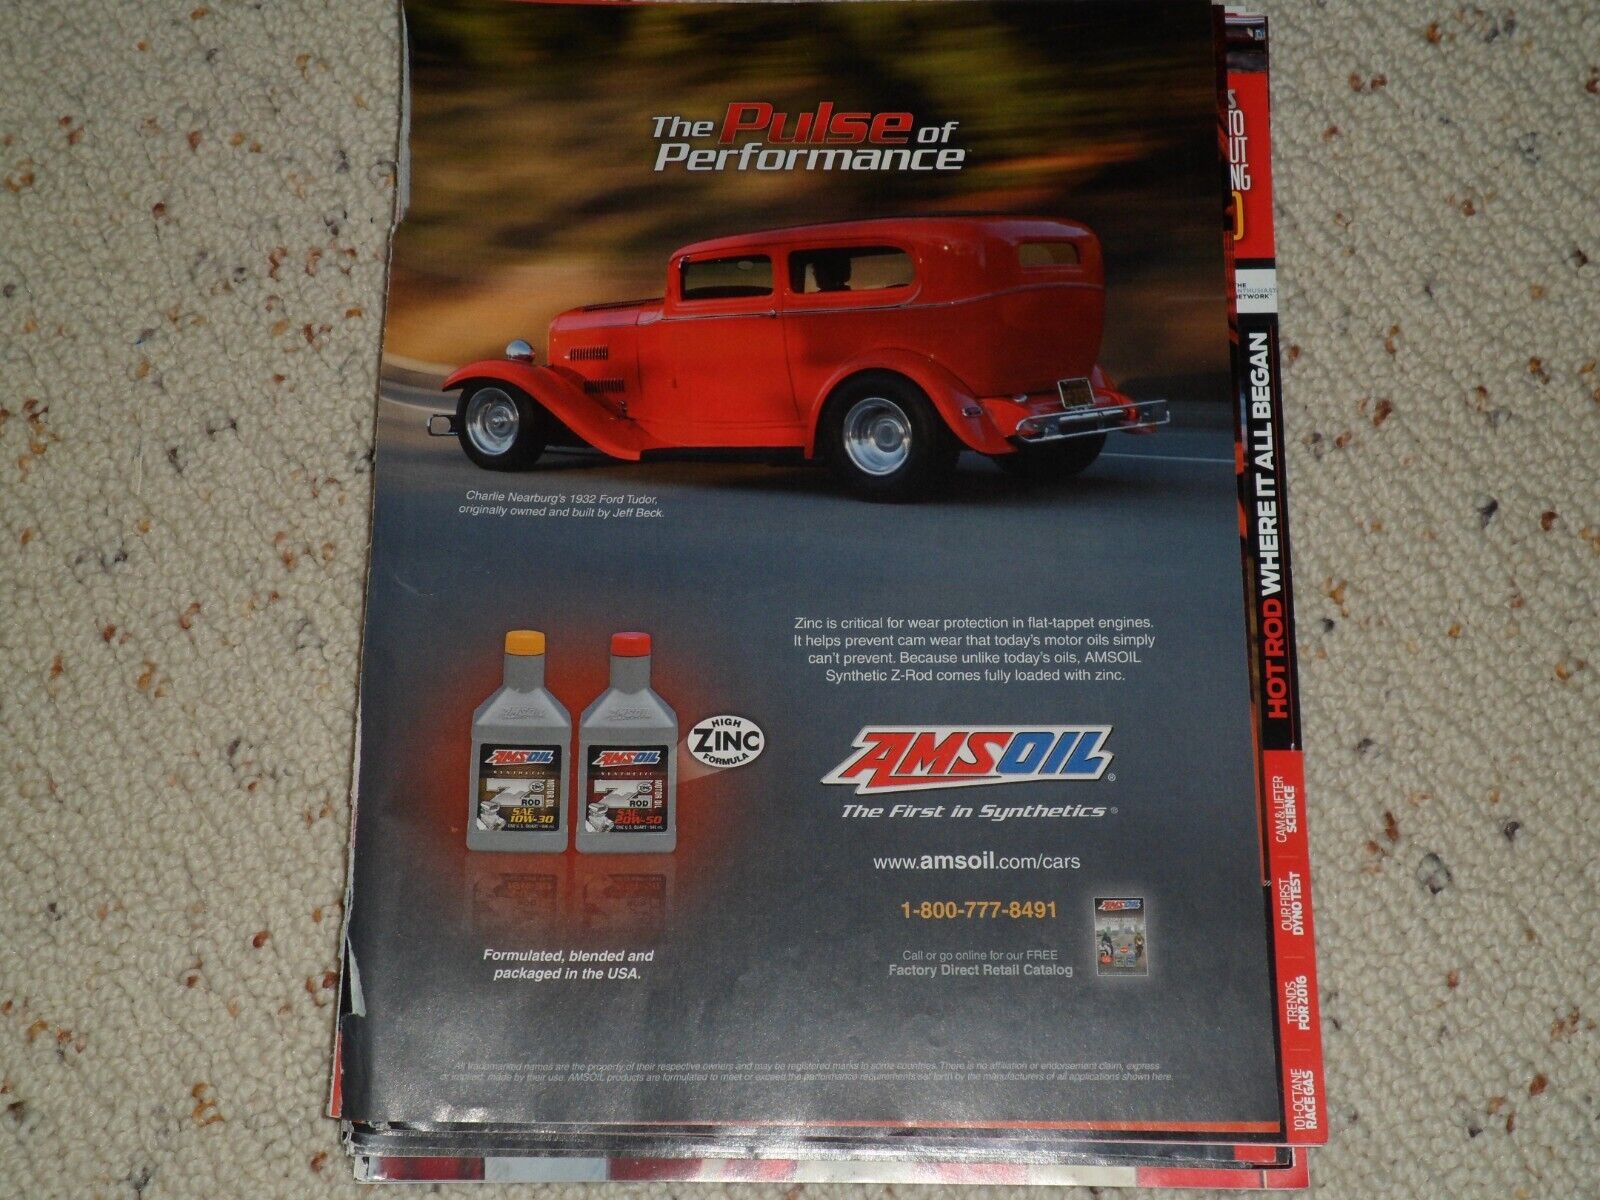 2016 AMSOIL #2 AD / ARTICLE